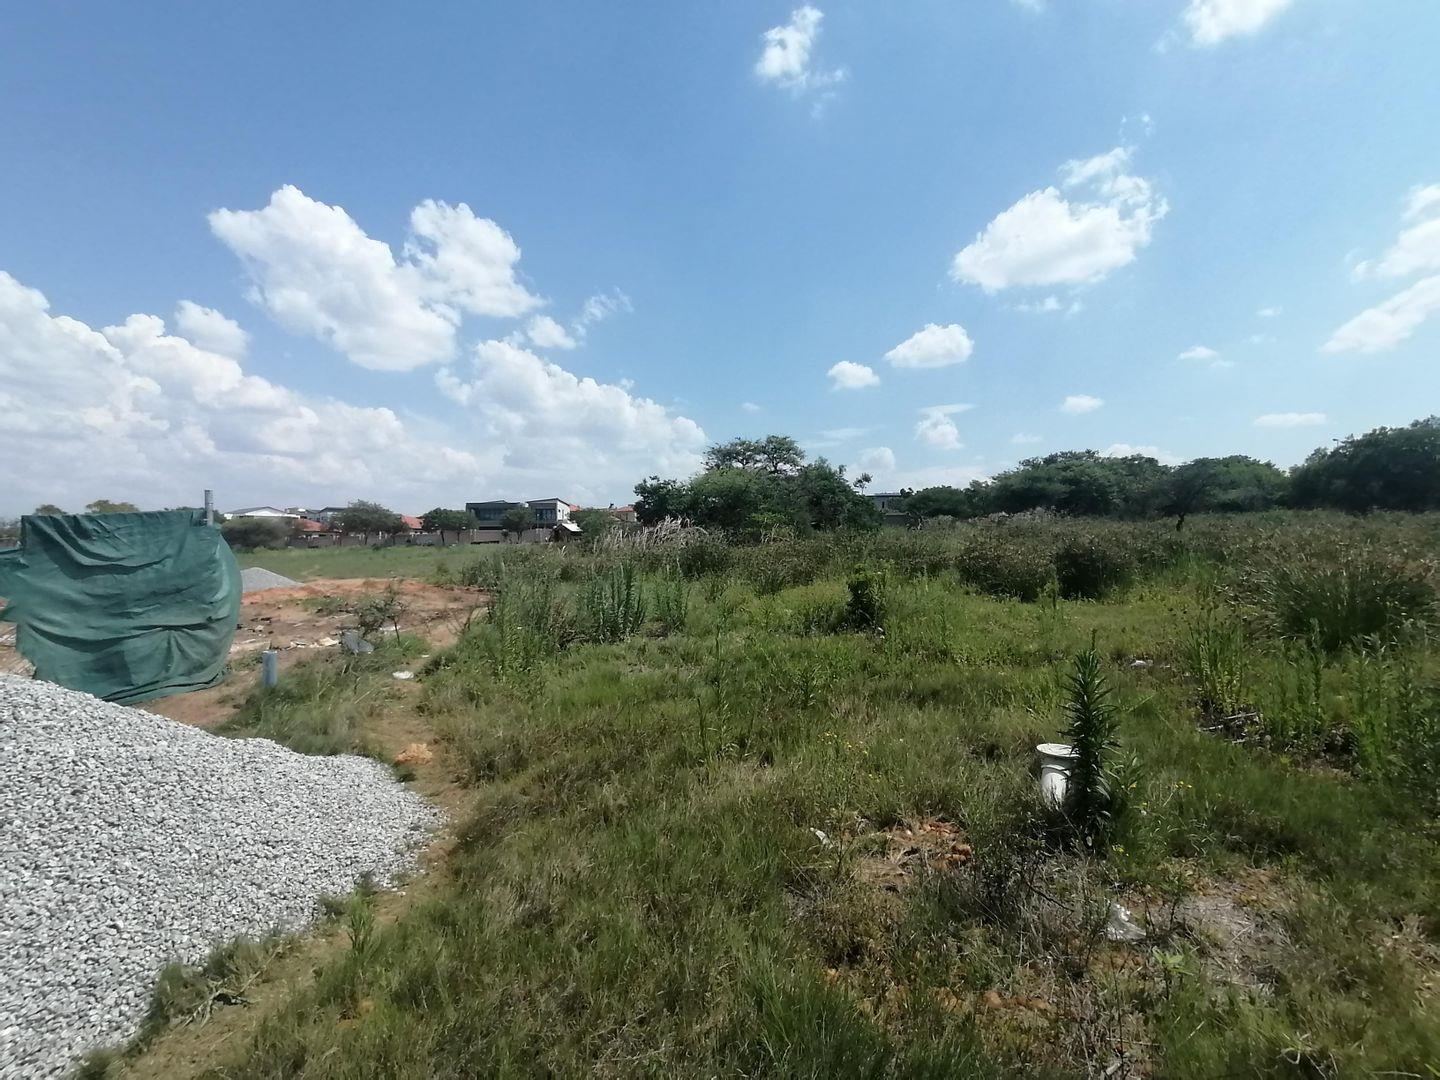  Bedroom Property for Sale in Woodhill Estate Limpopo